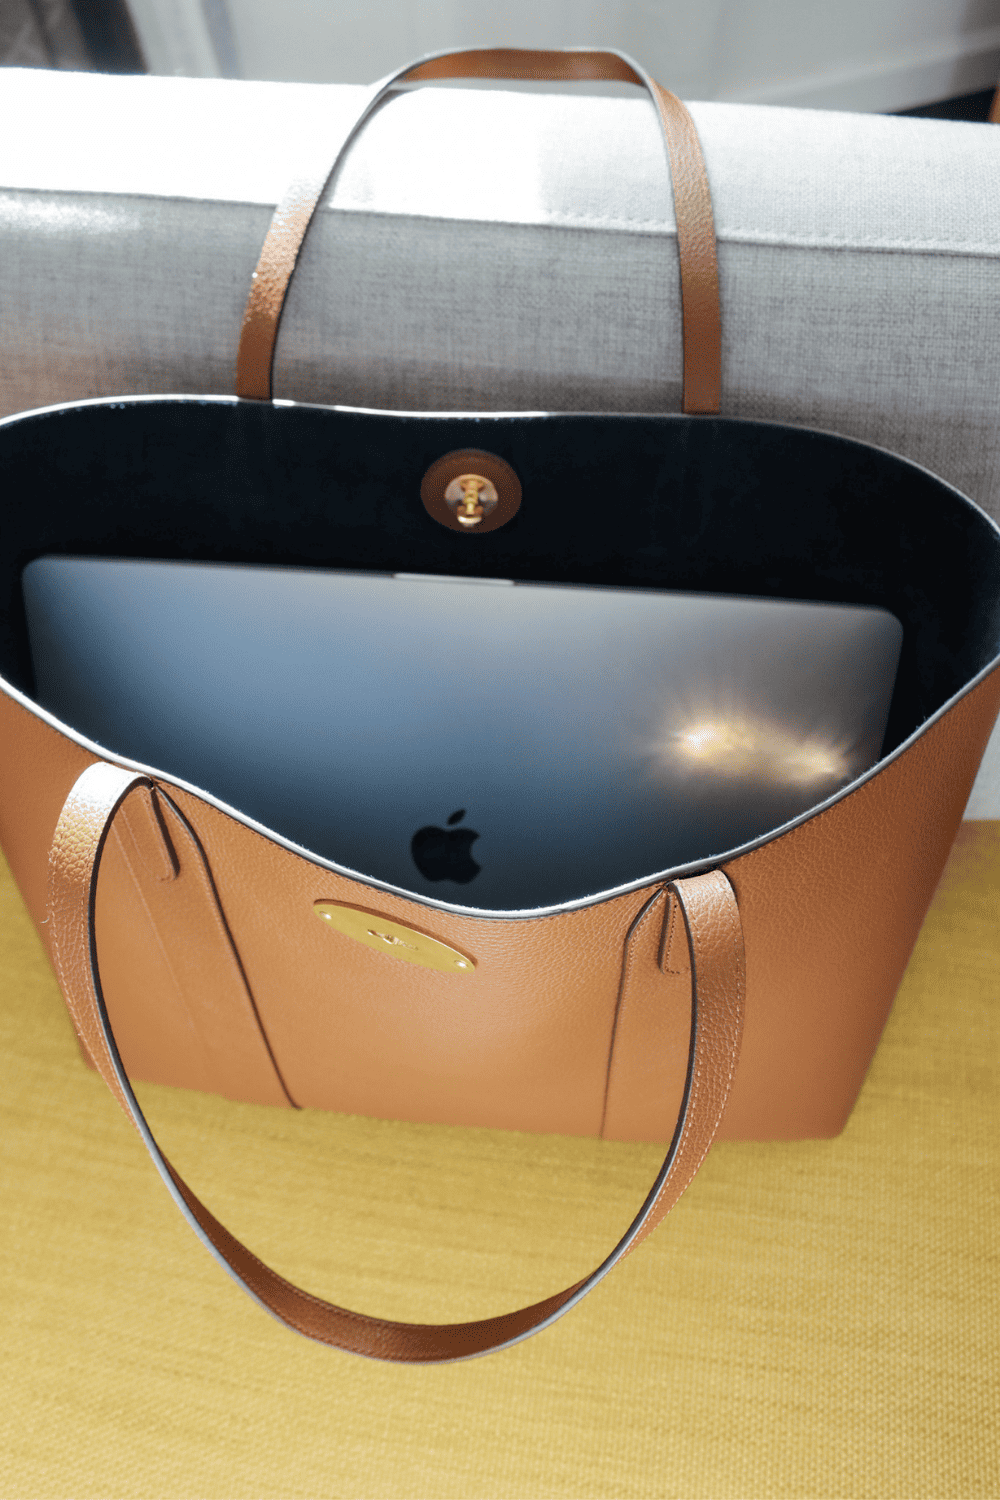 Laptop inside the Mulberry Tote bag